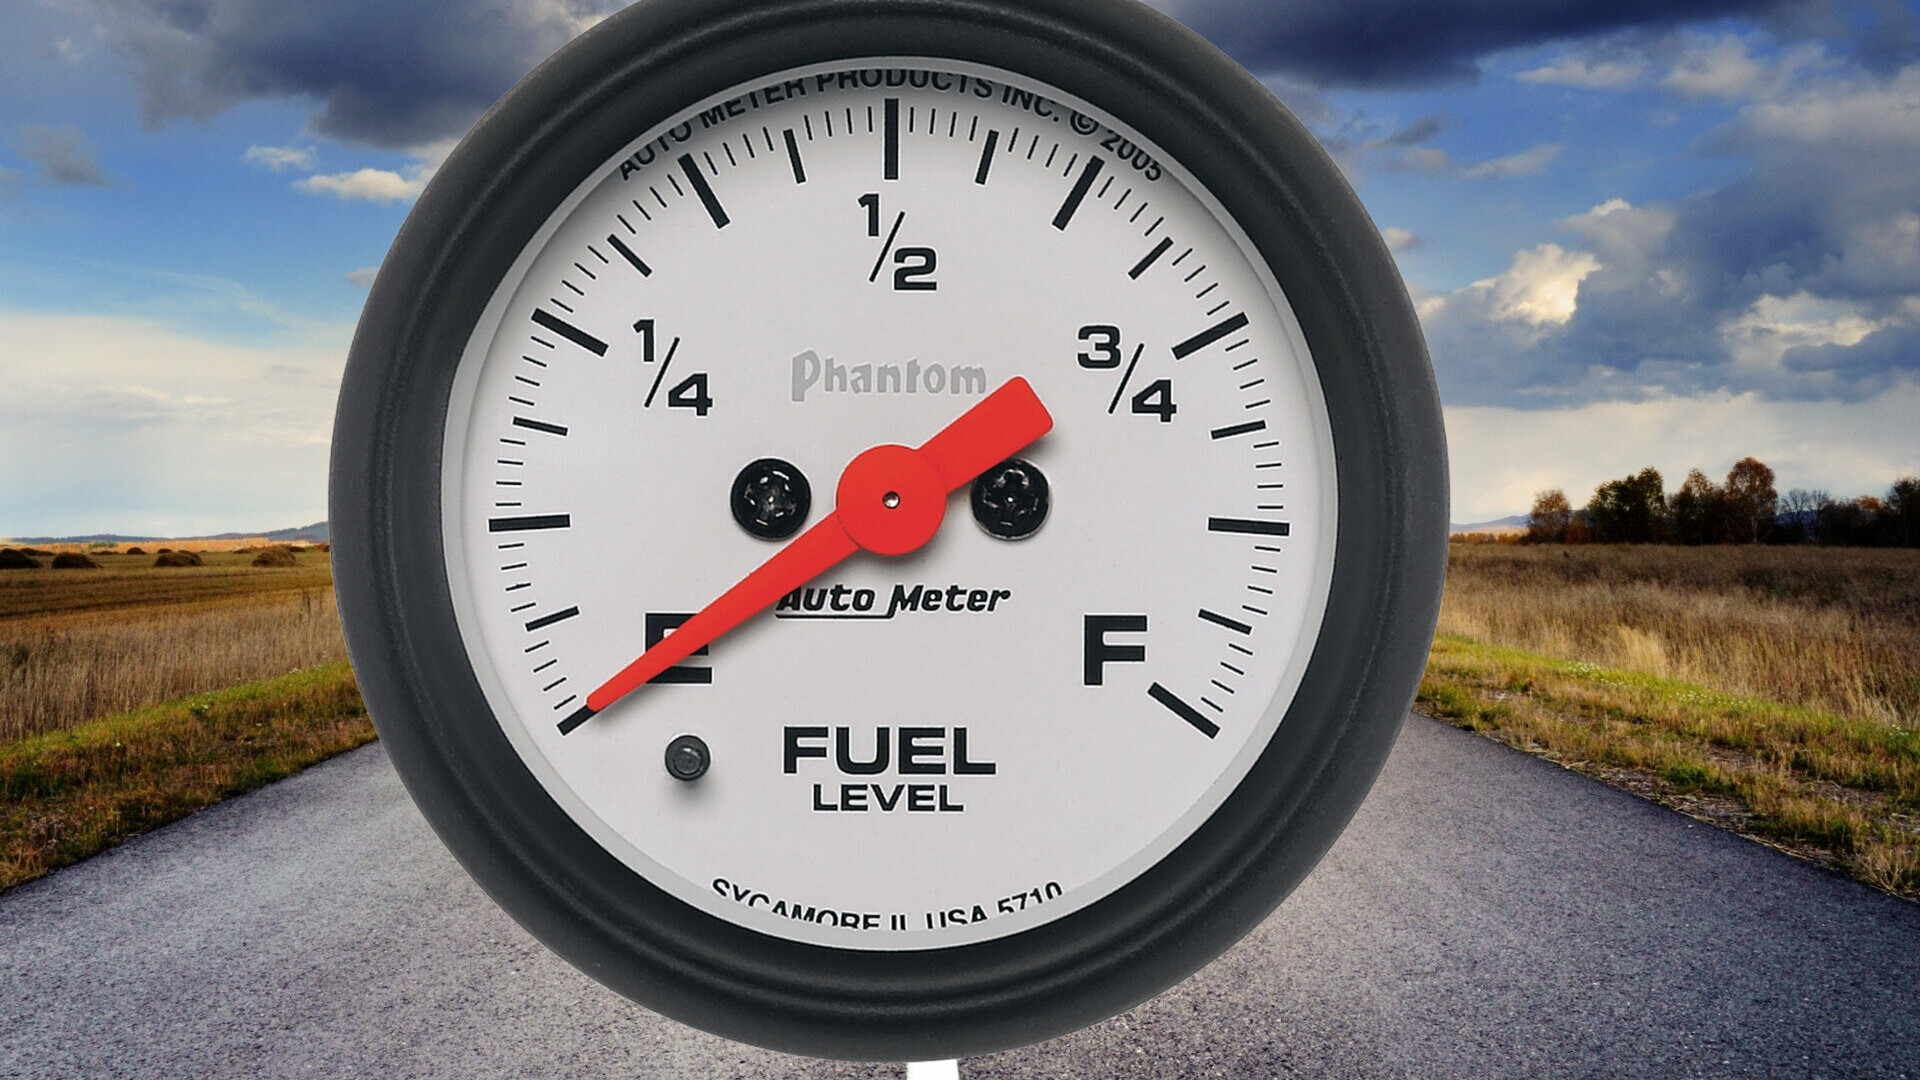 These hypermiling techniques can help preserve your fuel efficiency